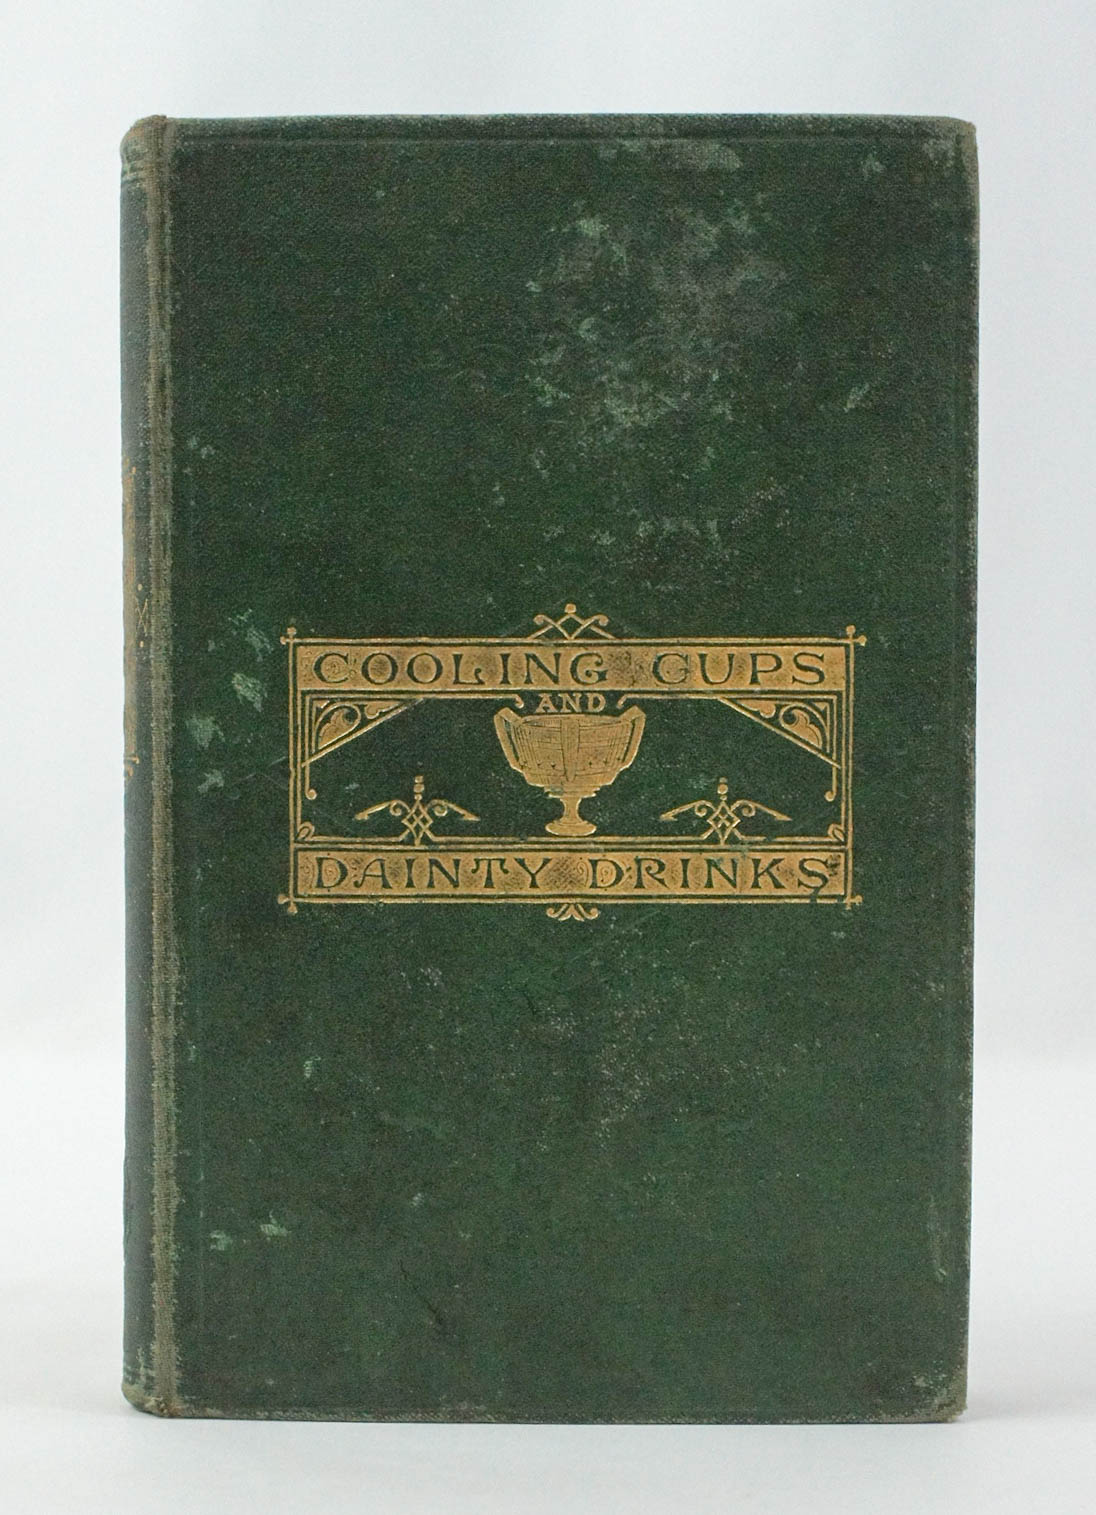 Cooling Cups and Dainty Drinks 1870 Edition